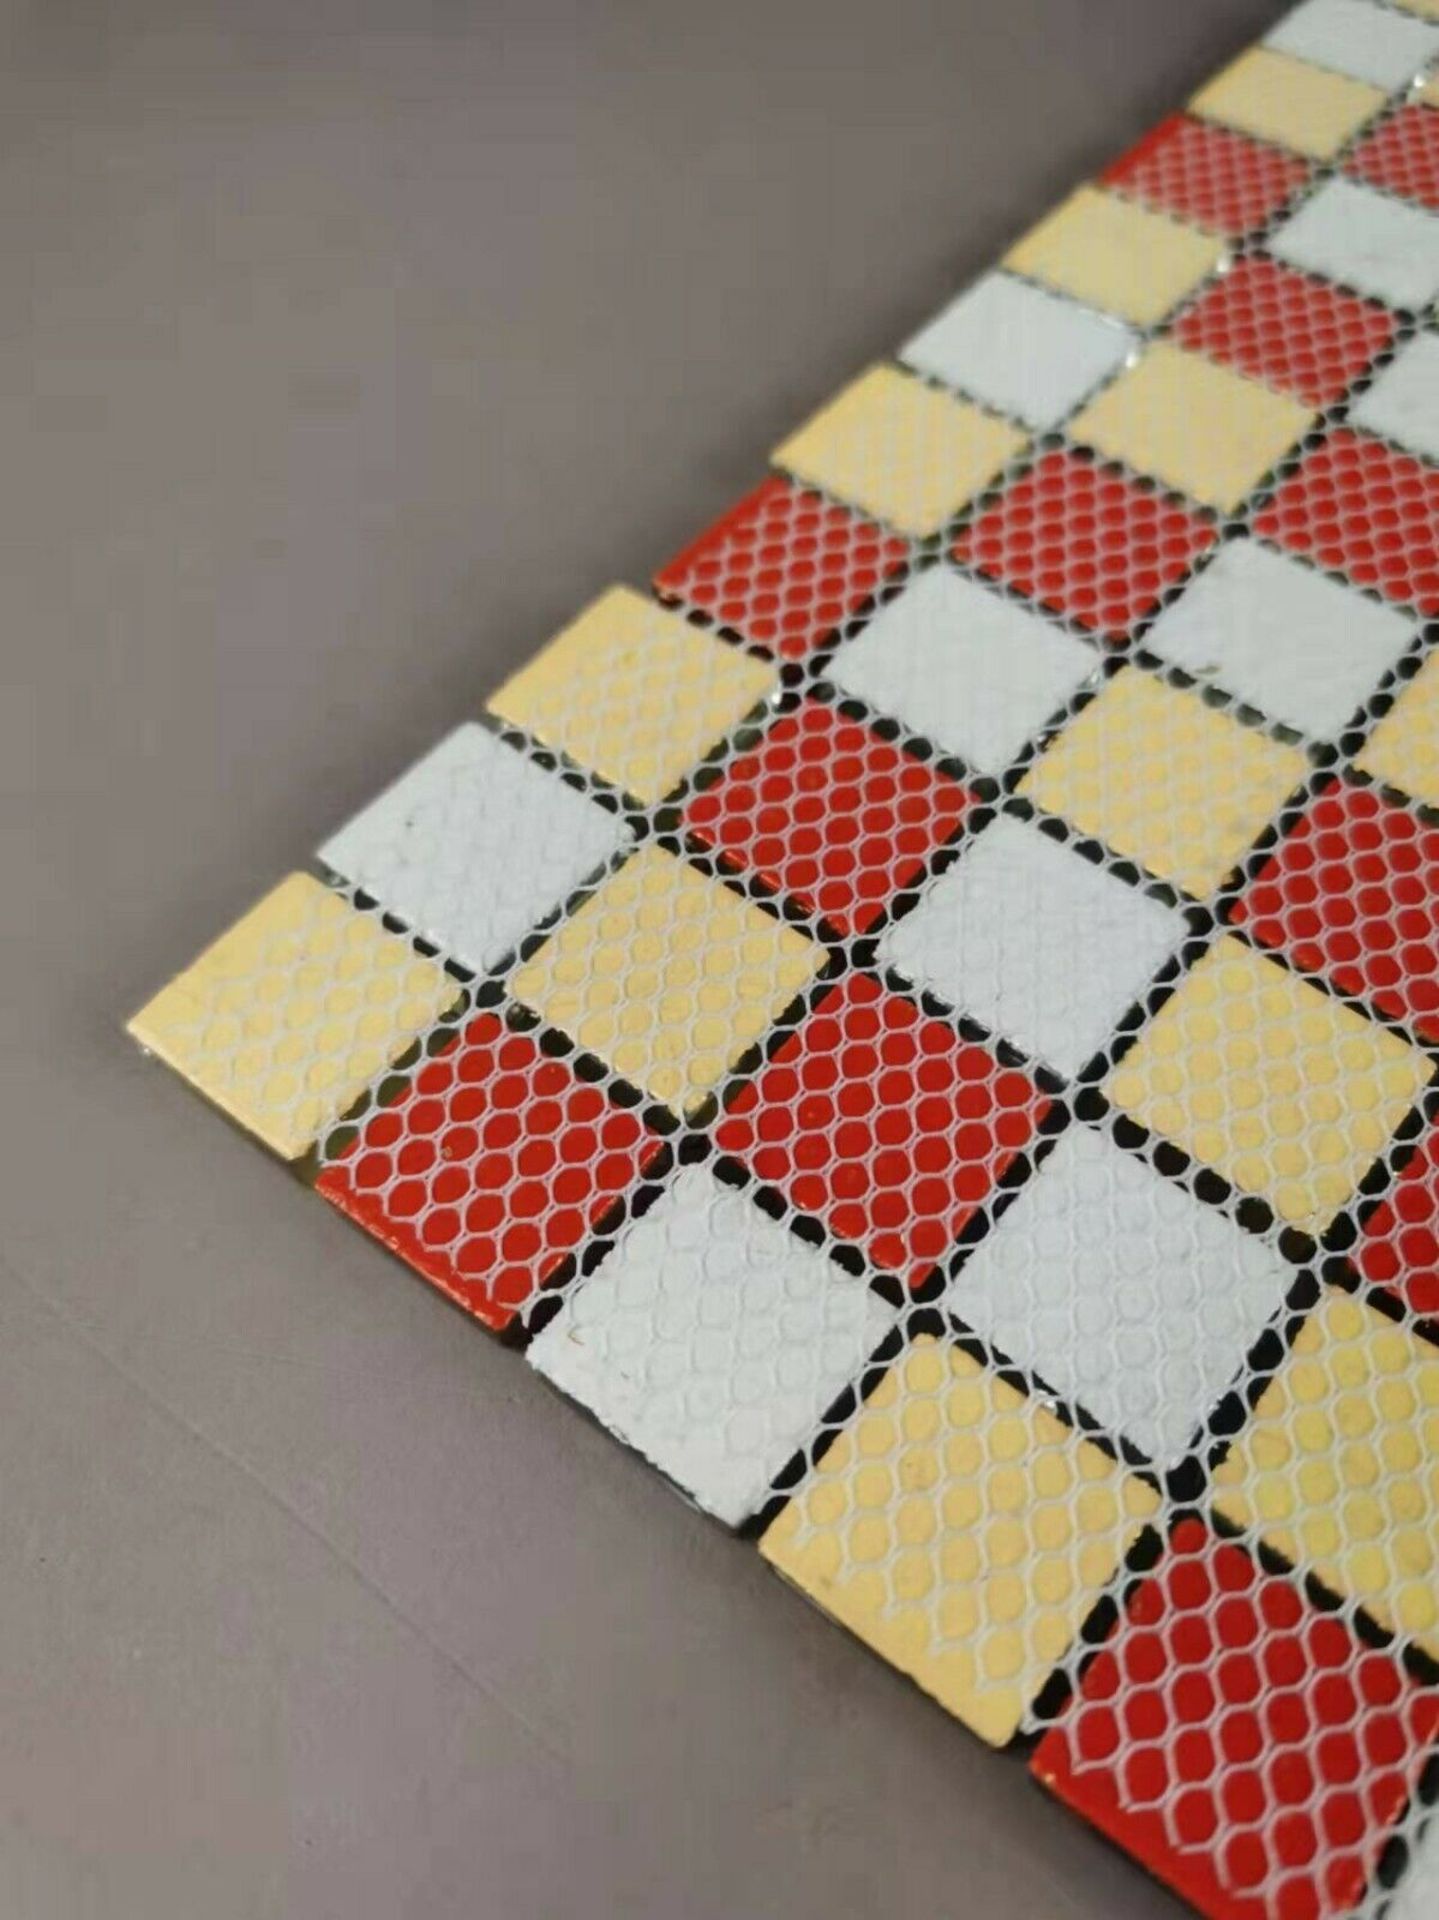 5 Square Metres - High Quality Glass/Stainless Steel Mosaic Tiles - Image 4 of 4